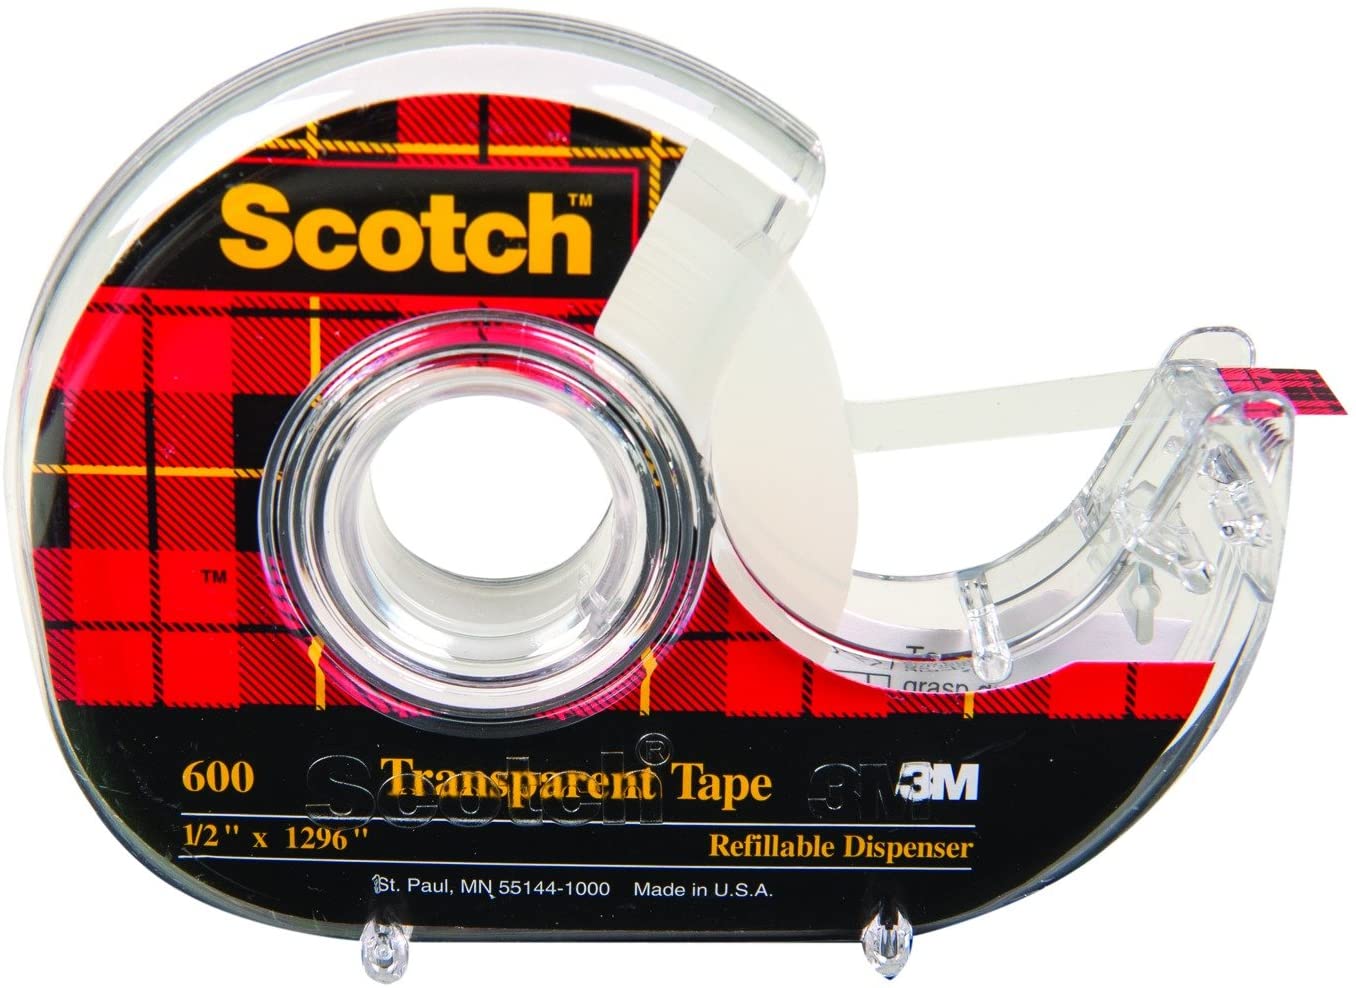 how did scotch tape get its name and where did it originate